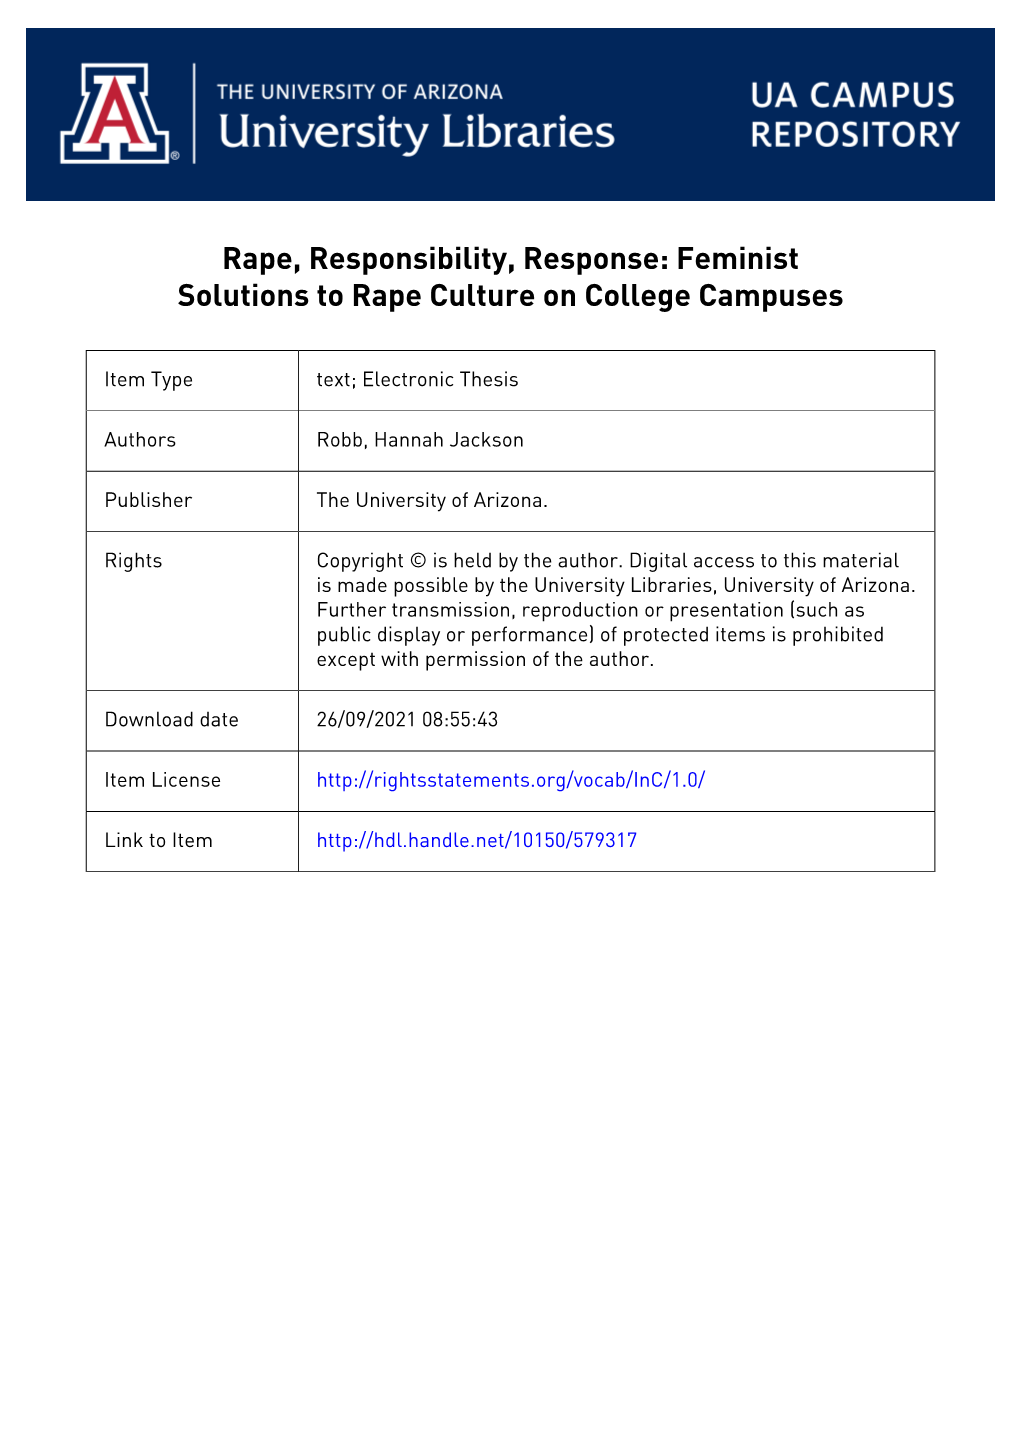 Feminist Solutions to Rape Culture on College Campuses